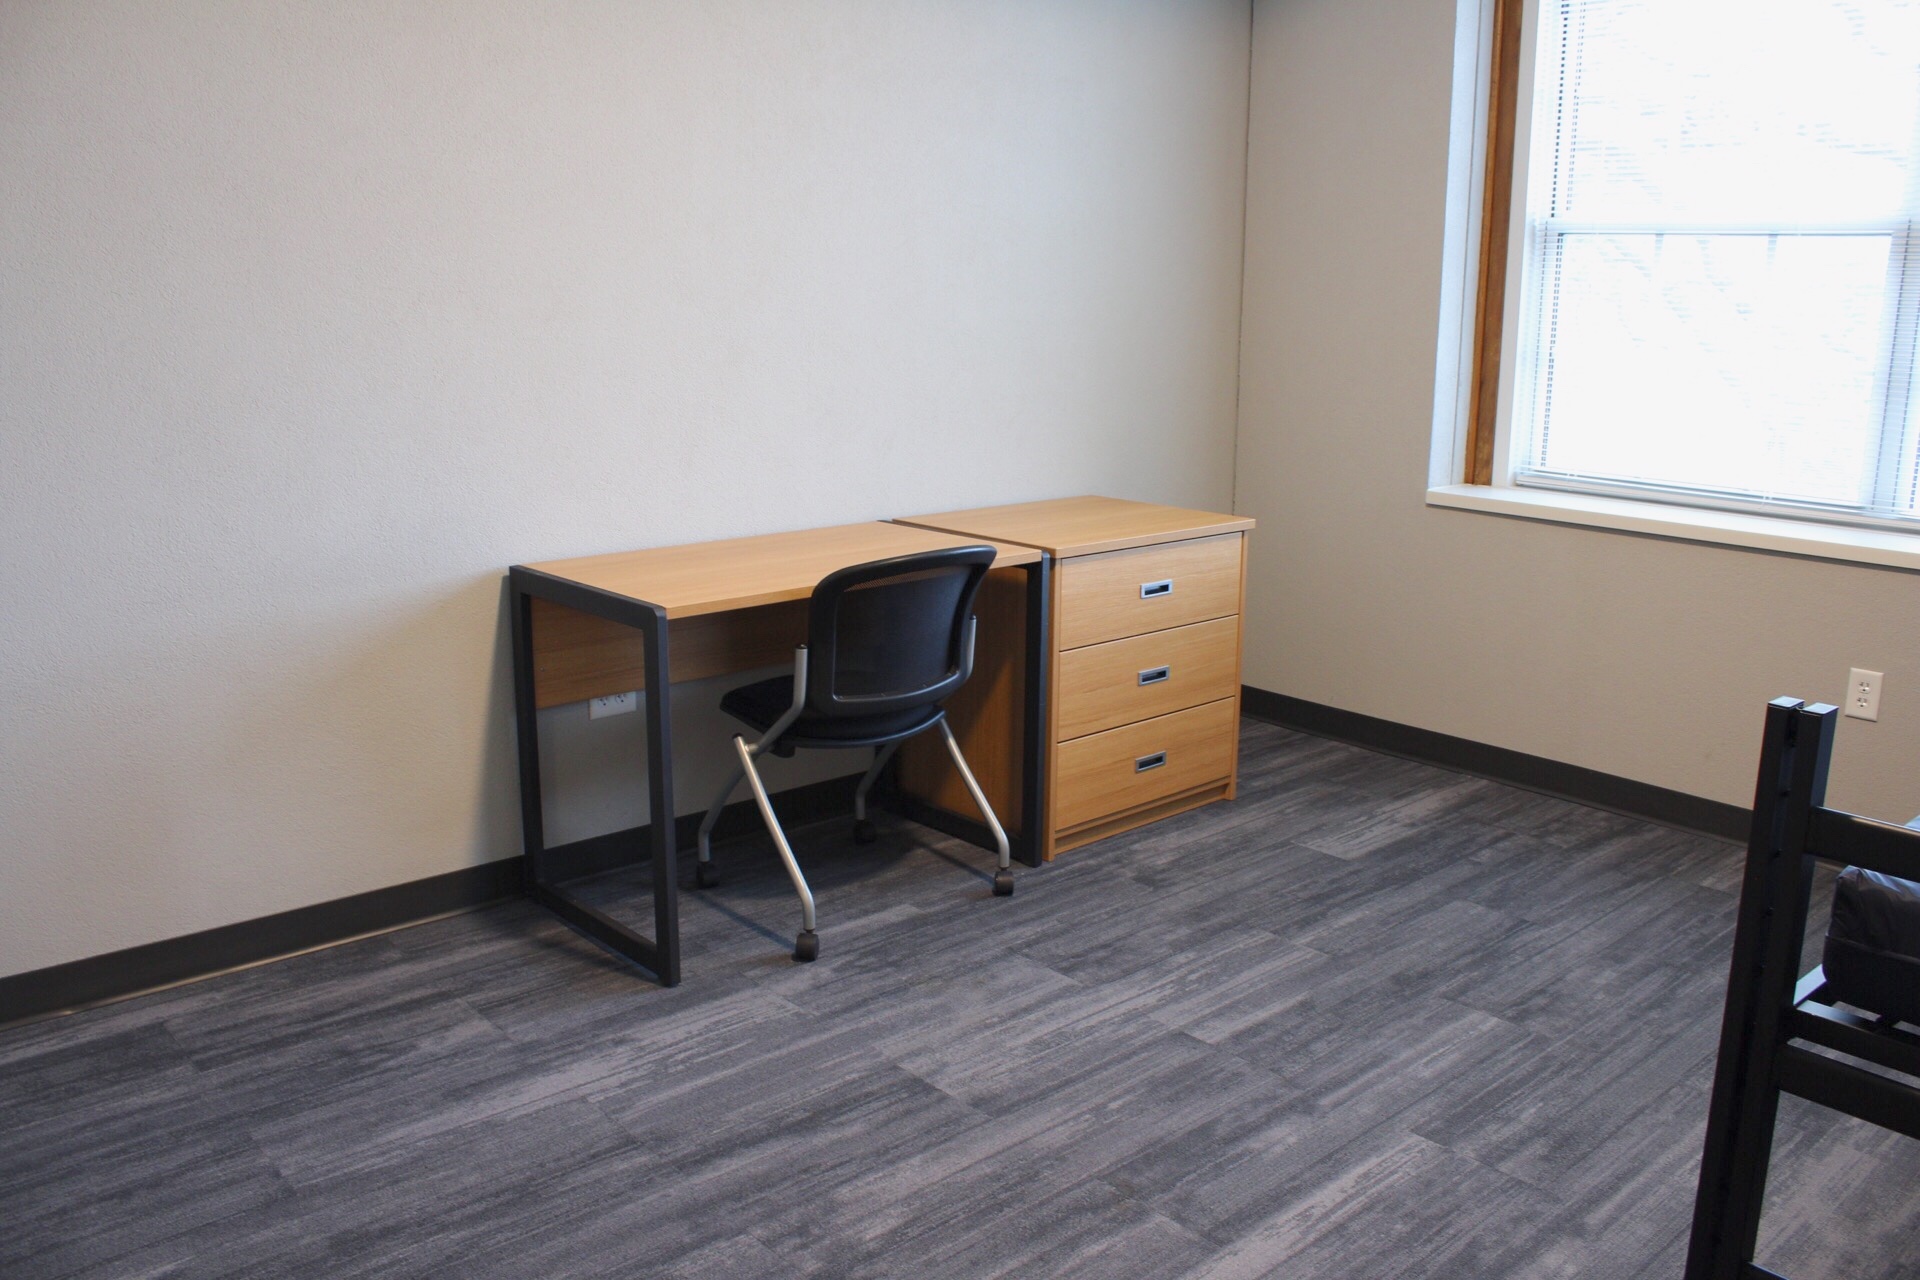 Delzell Hall room with a desk table, chair and 3-drawer dresser located near a large window.